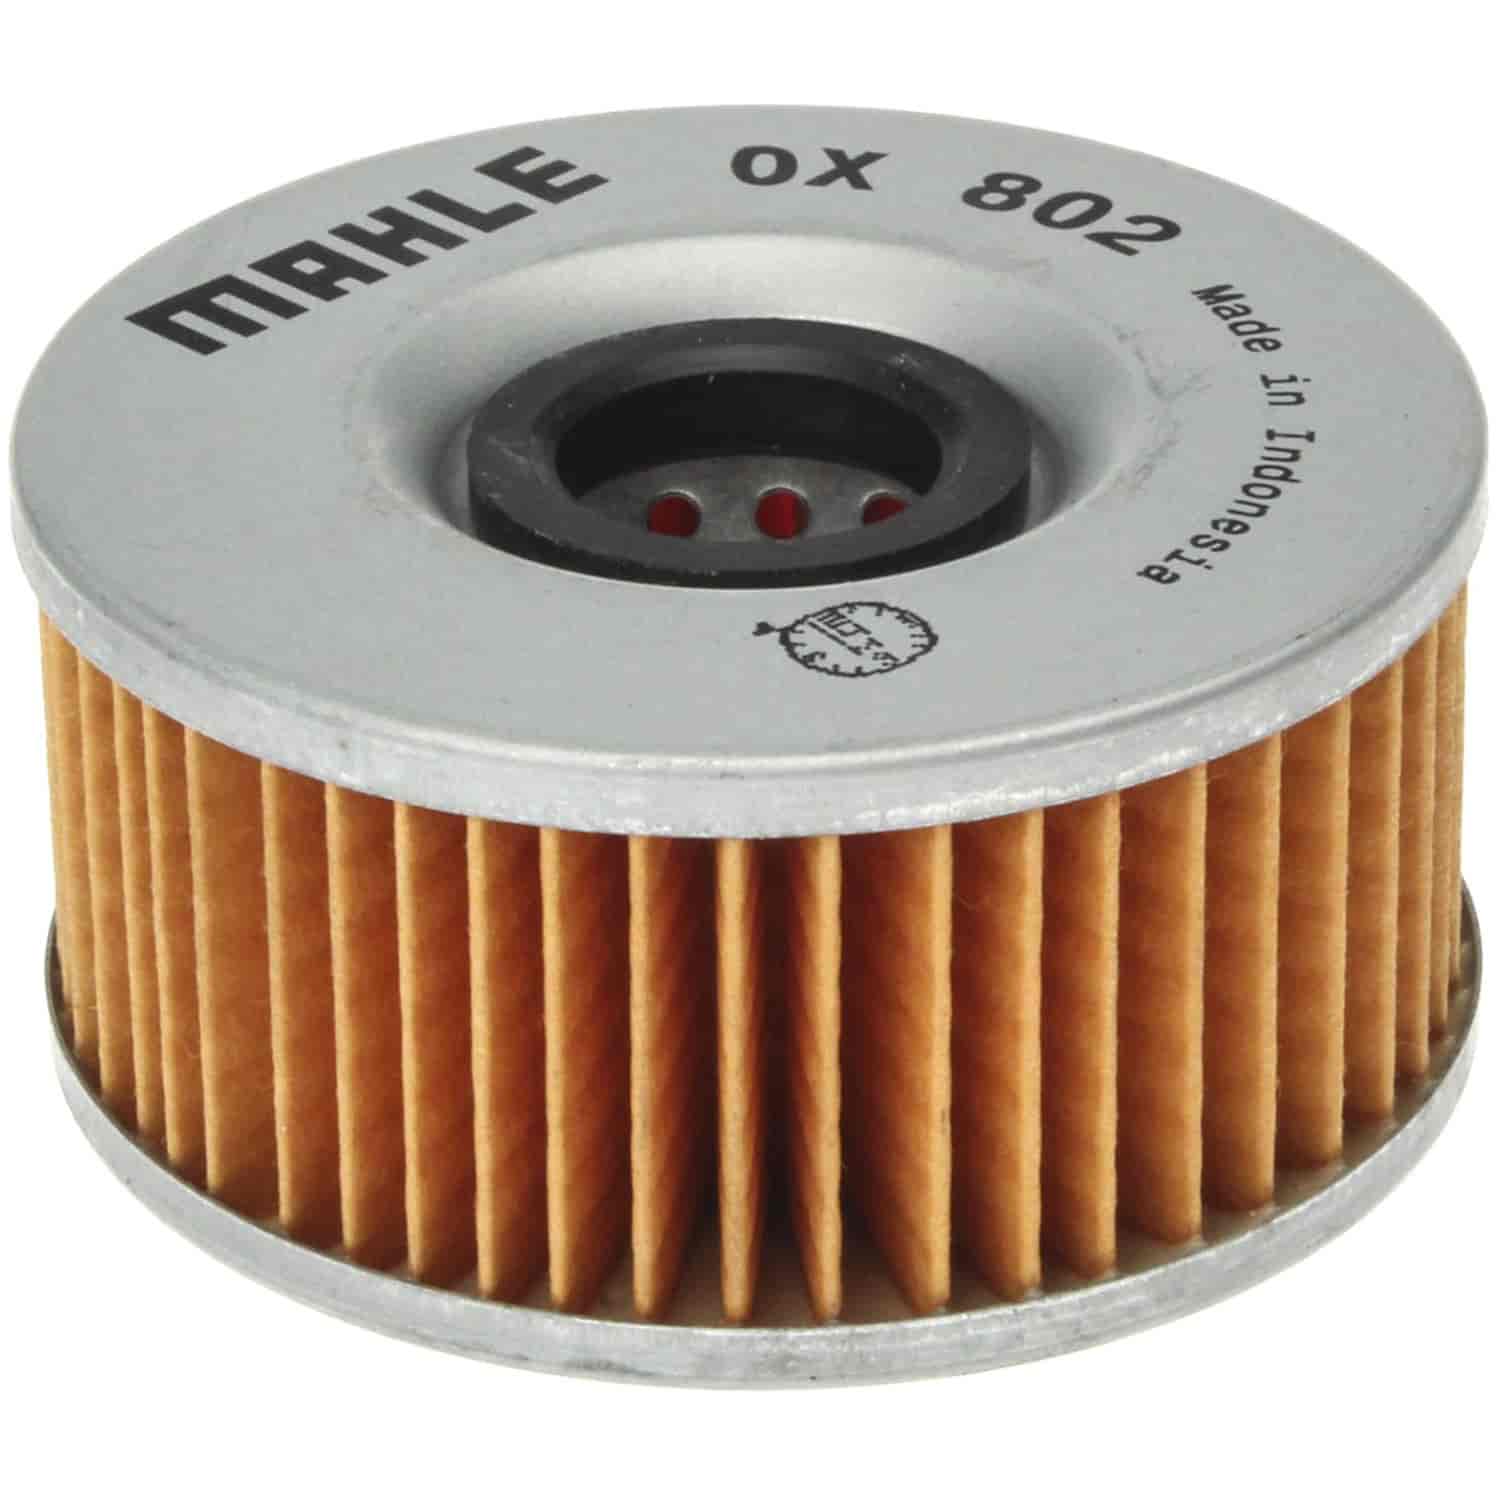 Mahle Oil Filter Yahama motorcycles 1977-1993